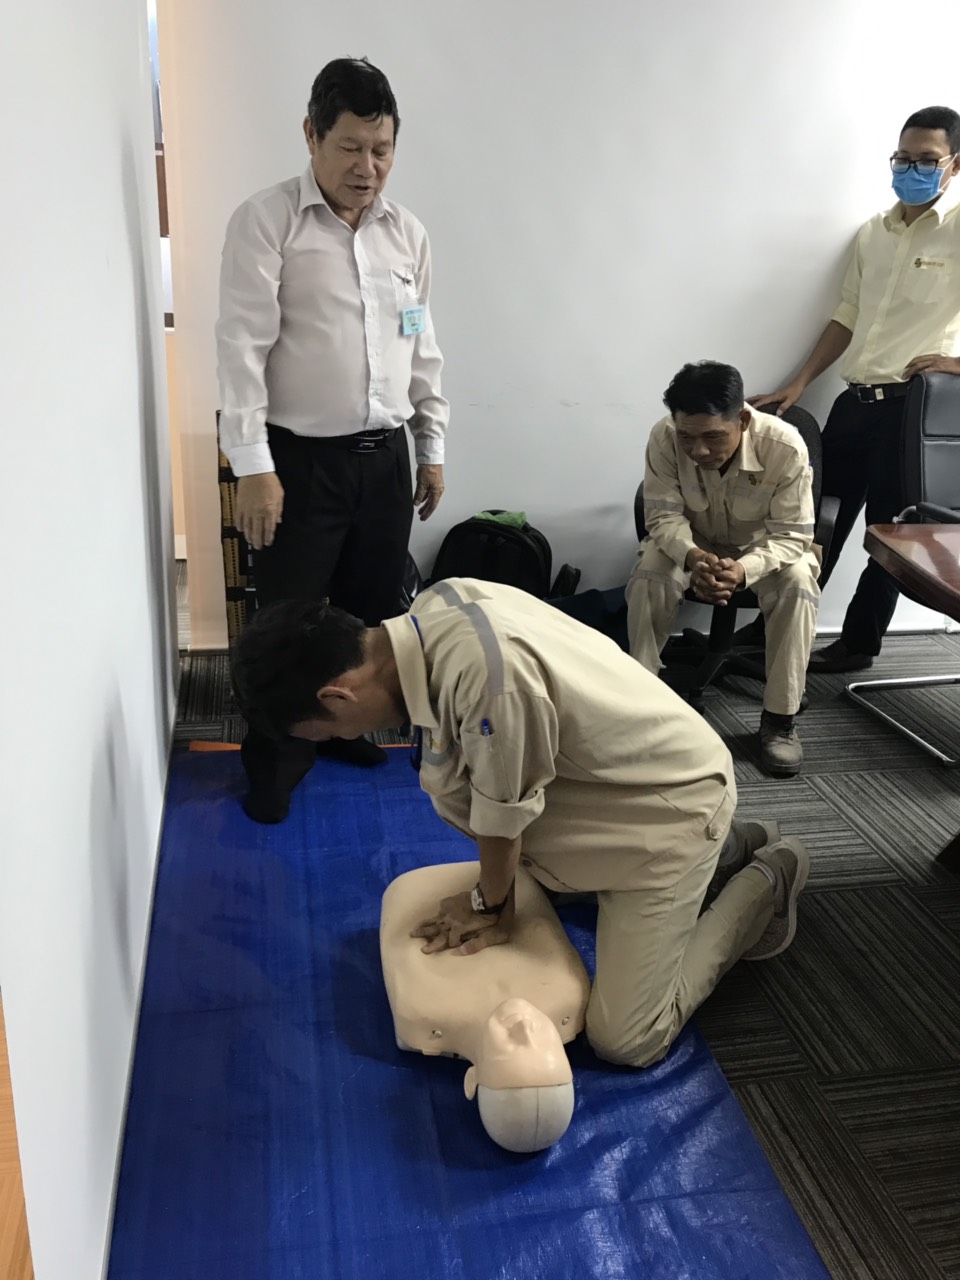 FIRST AID ACTIVITY IN 03/2020